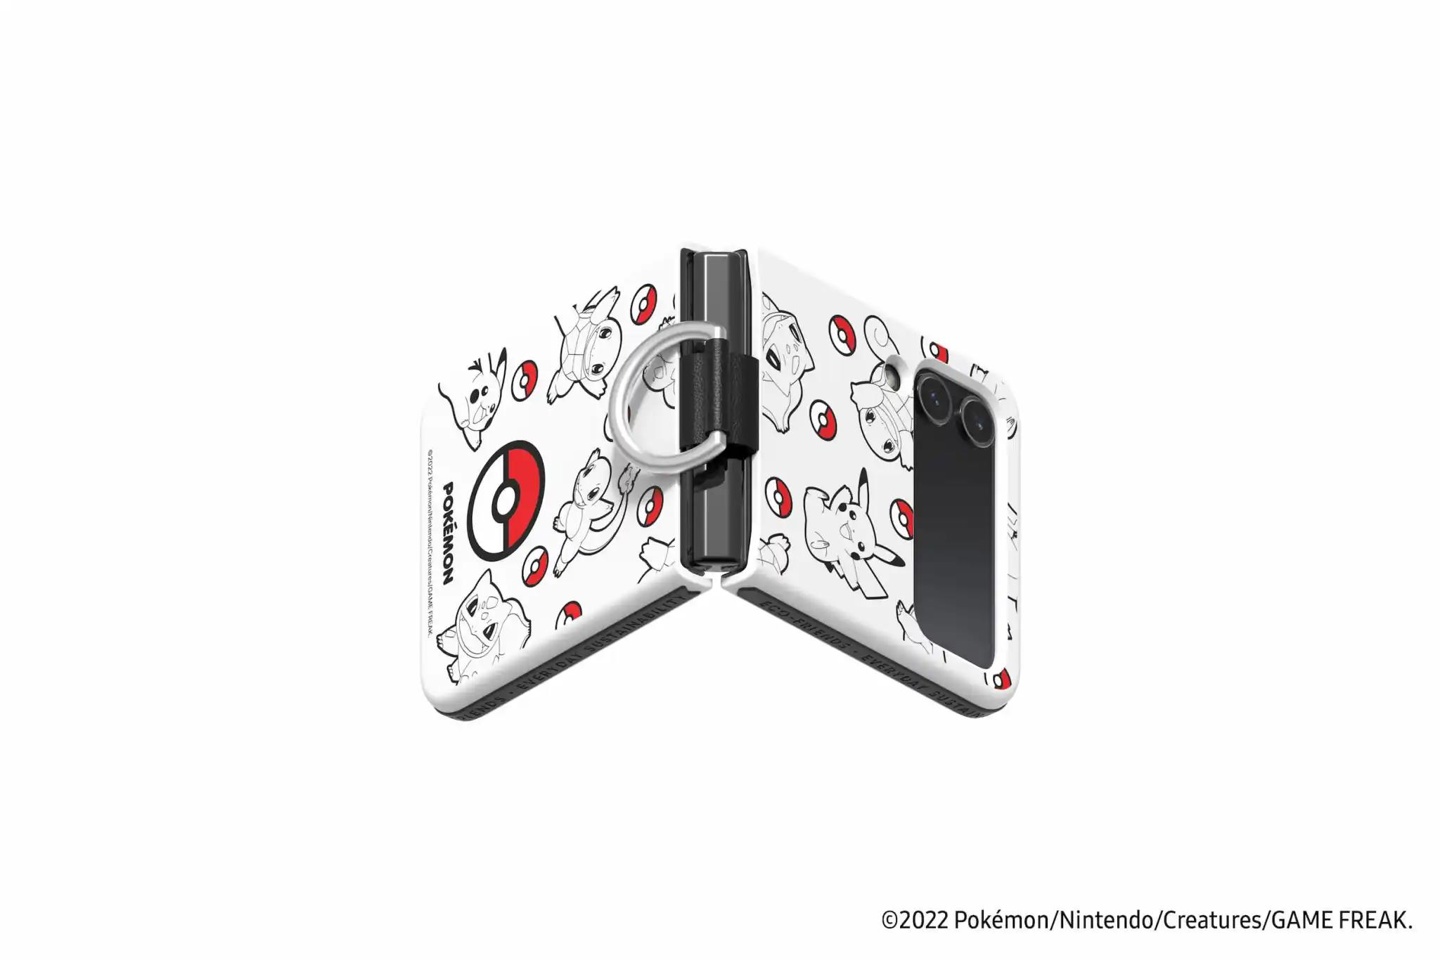 Samsung releases Pokemon-themed accessories for the Galaxy Z Flip 4